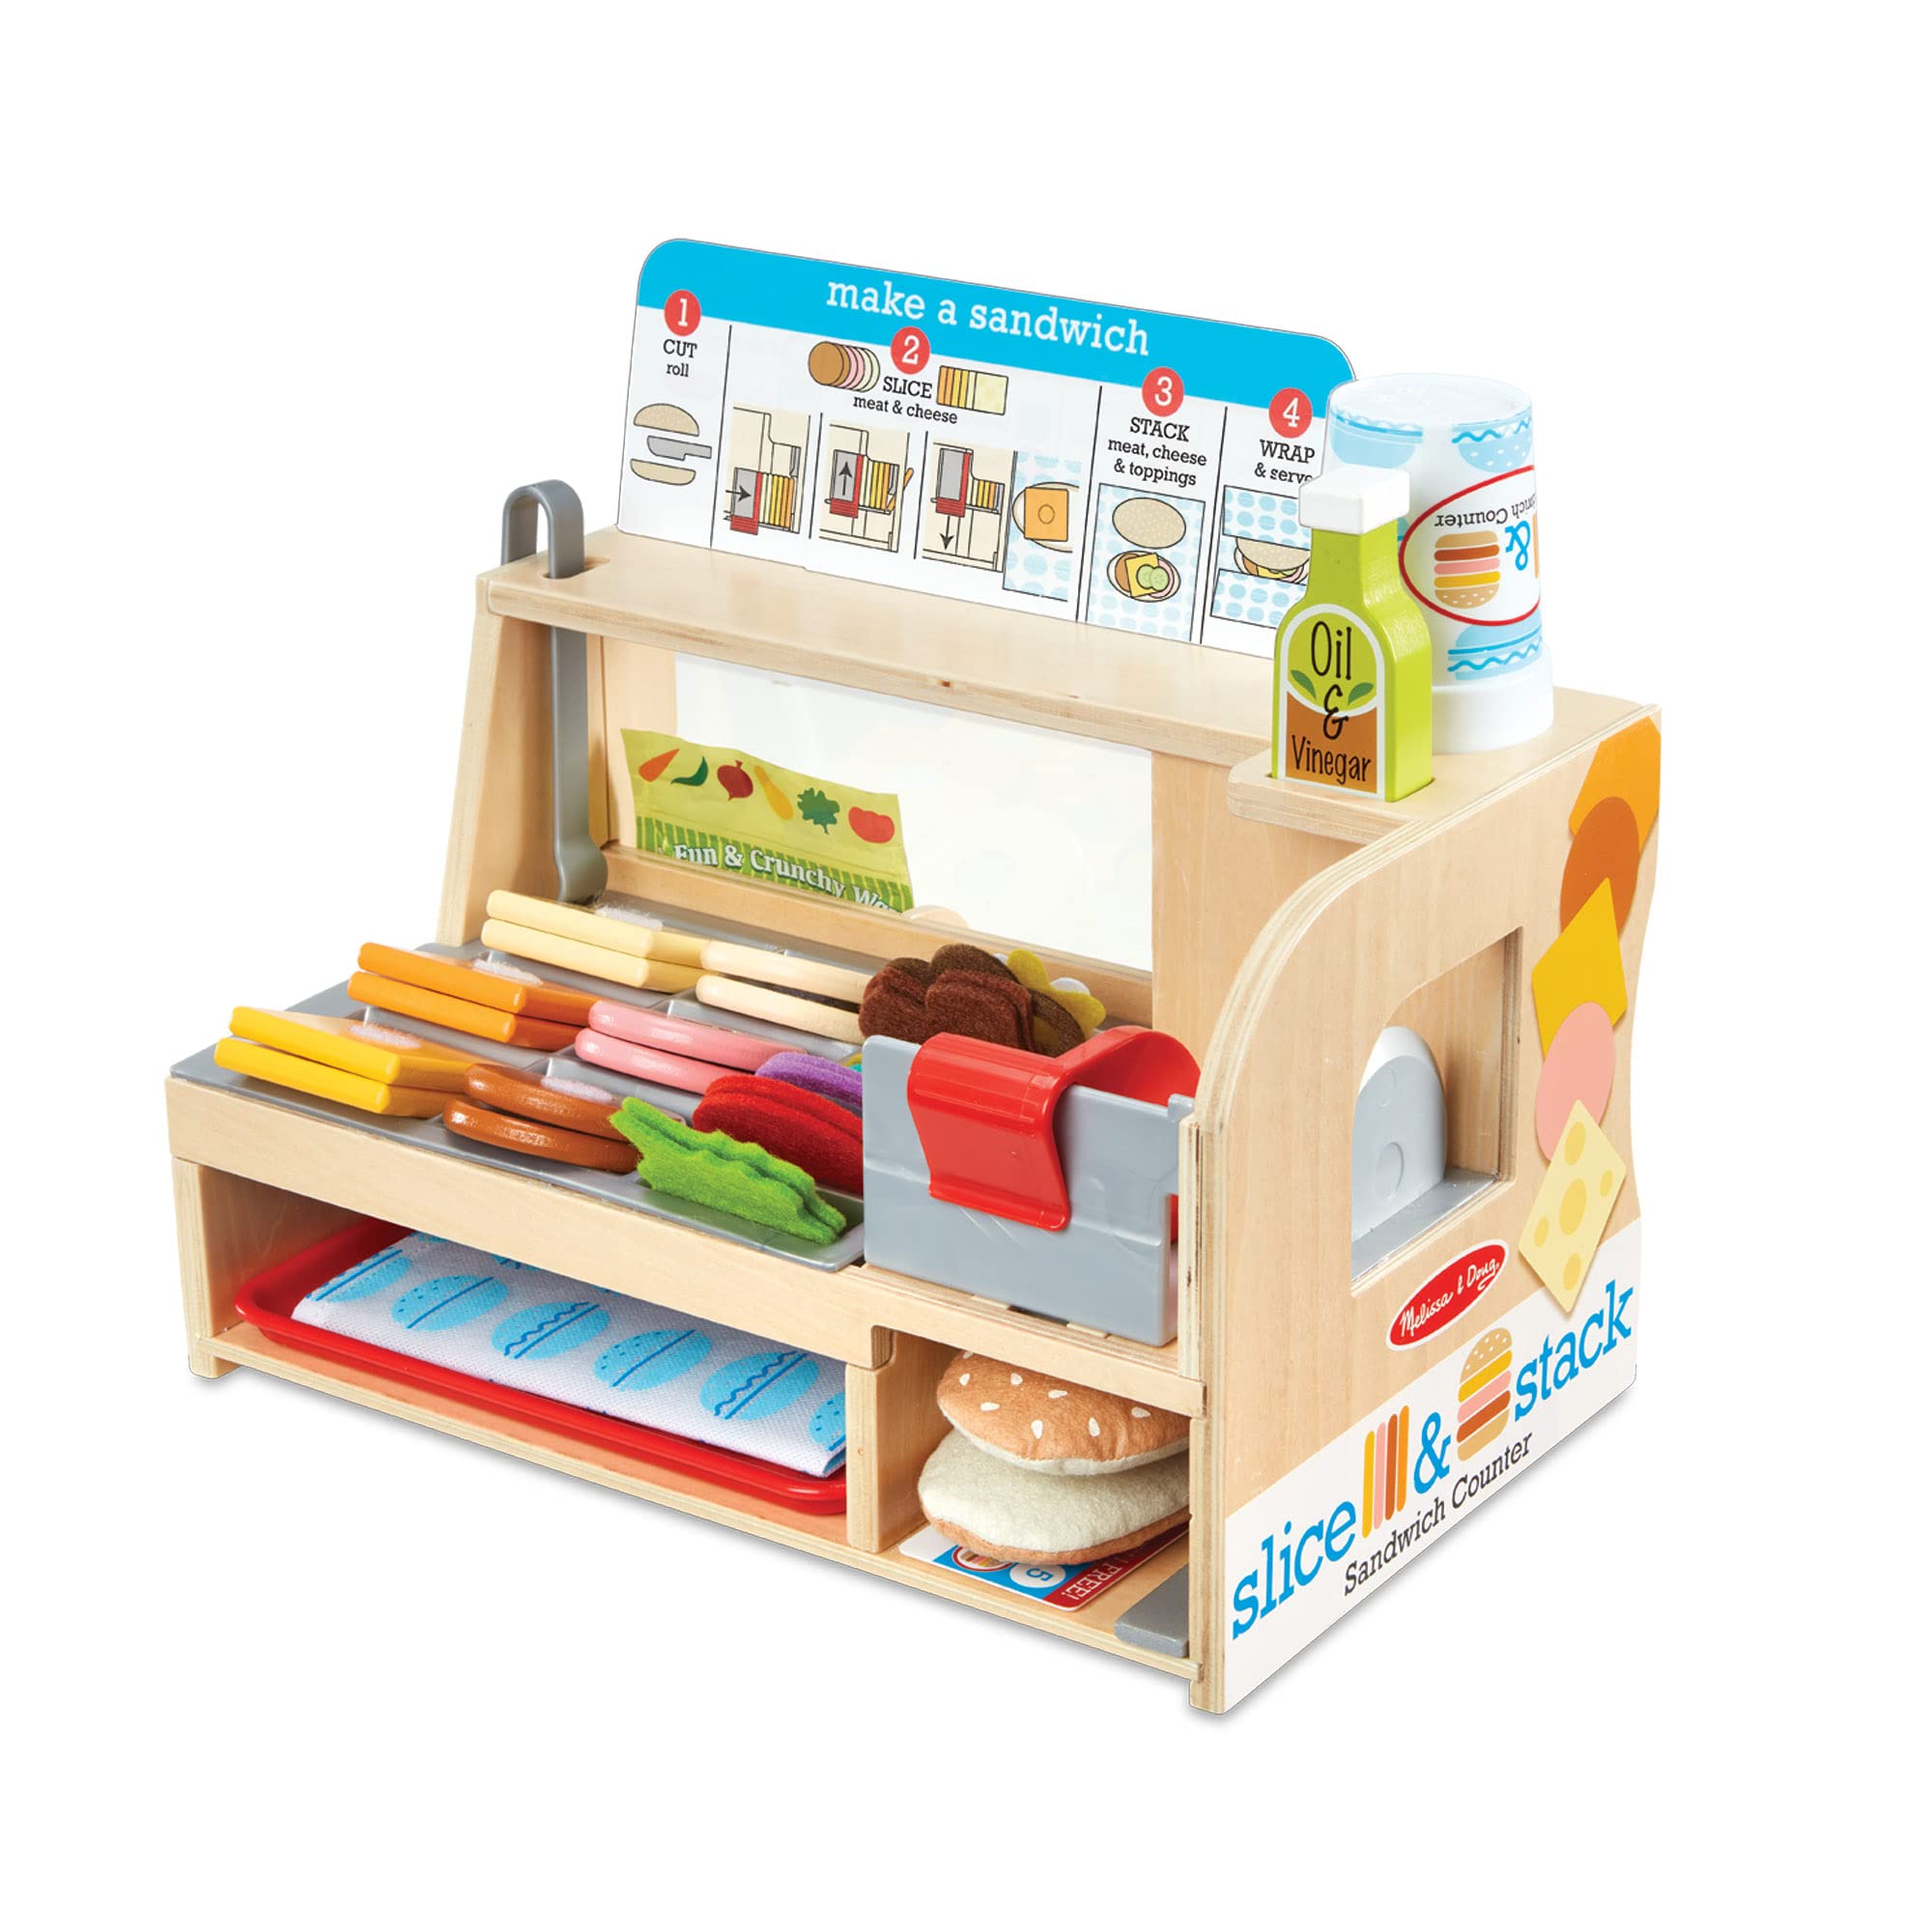 Melissa & Doug Wooden Slice & Stack Sandwich counter with Deli Slicer - 56-Piece Pretend Play Food Pieces